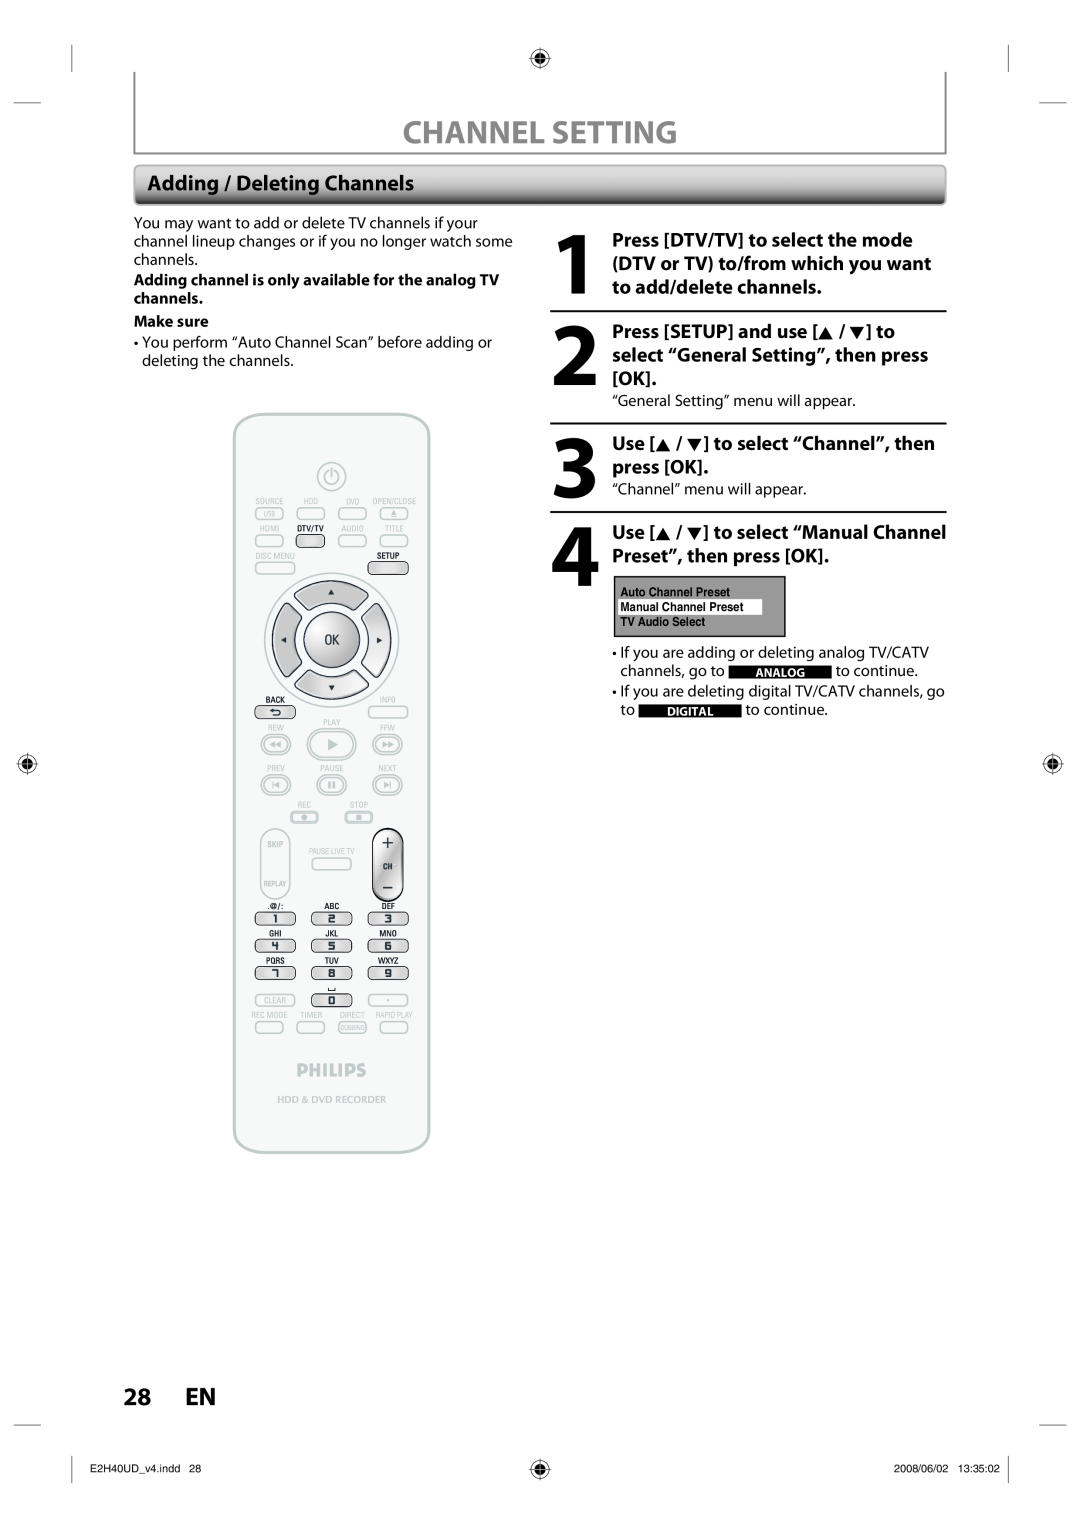 Philips DVDR3575H/37 Channel Setting, 28 EN, Adding / Deleting Channels, Use K / L to select “Channel”, then press OK 